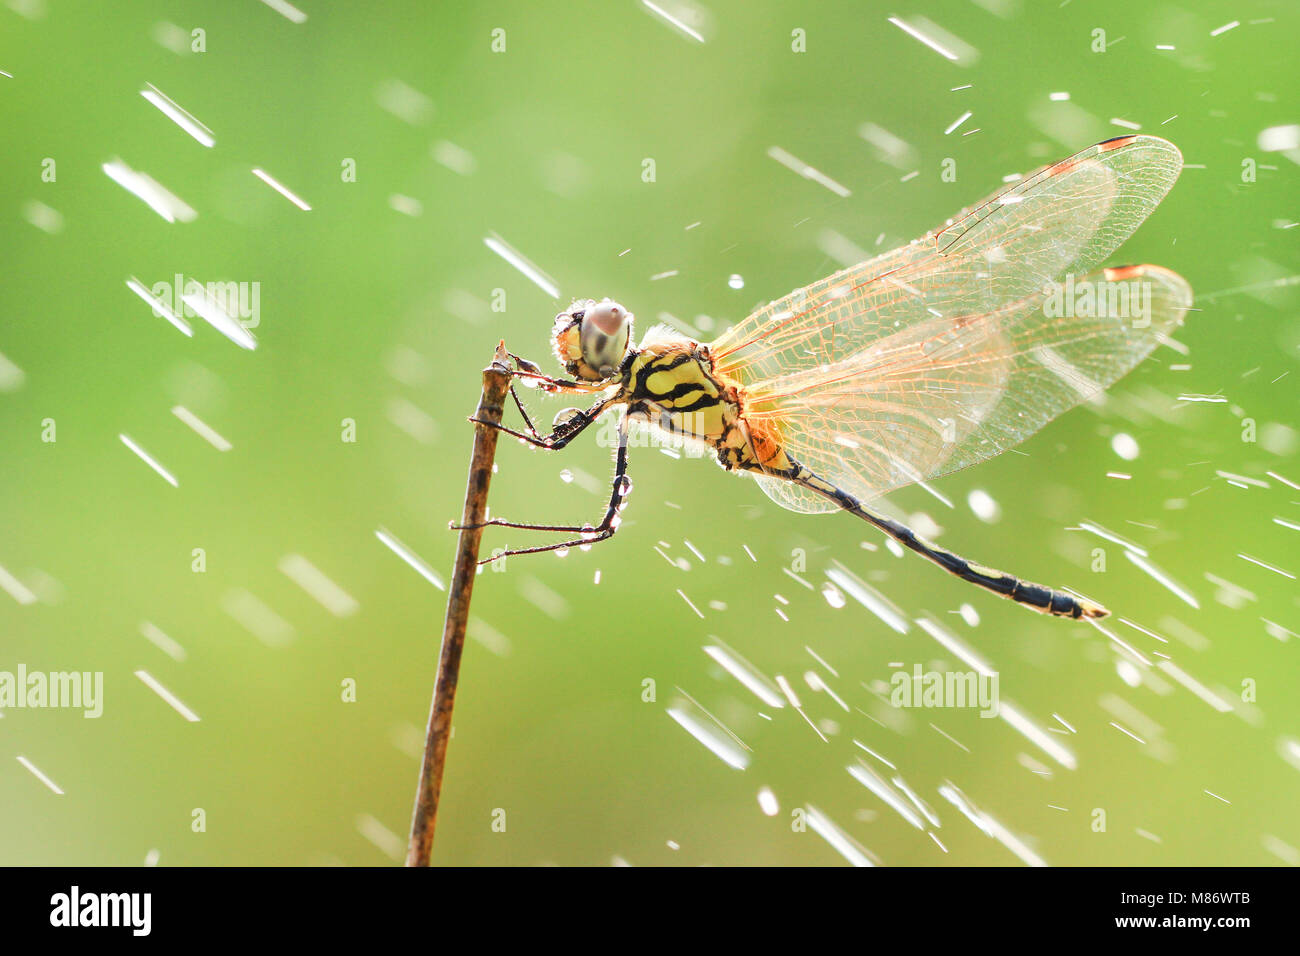 Dragonfly indonesia